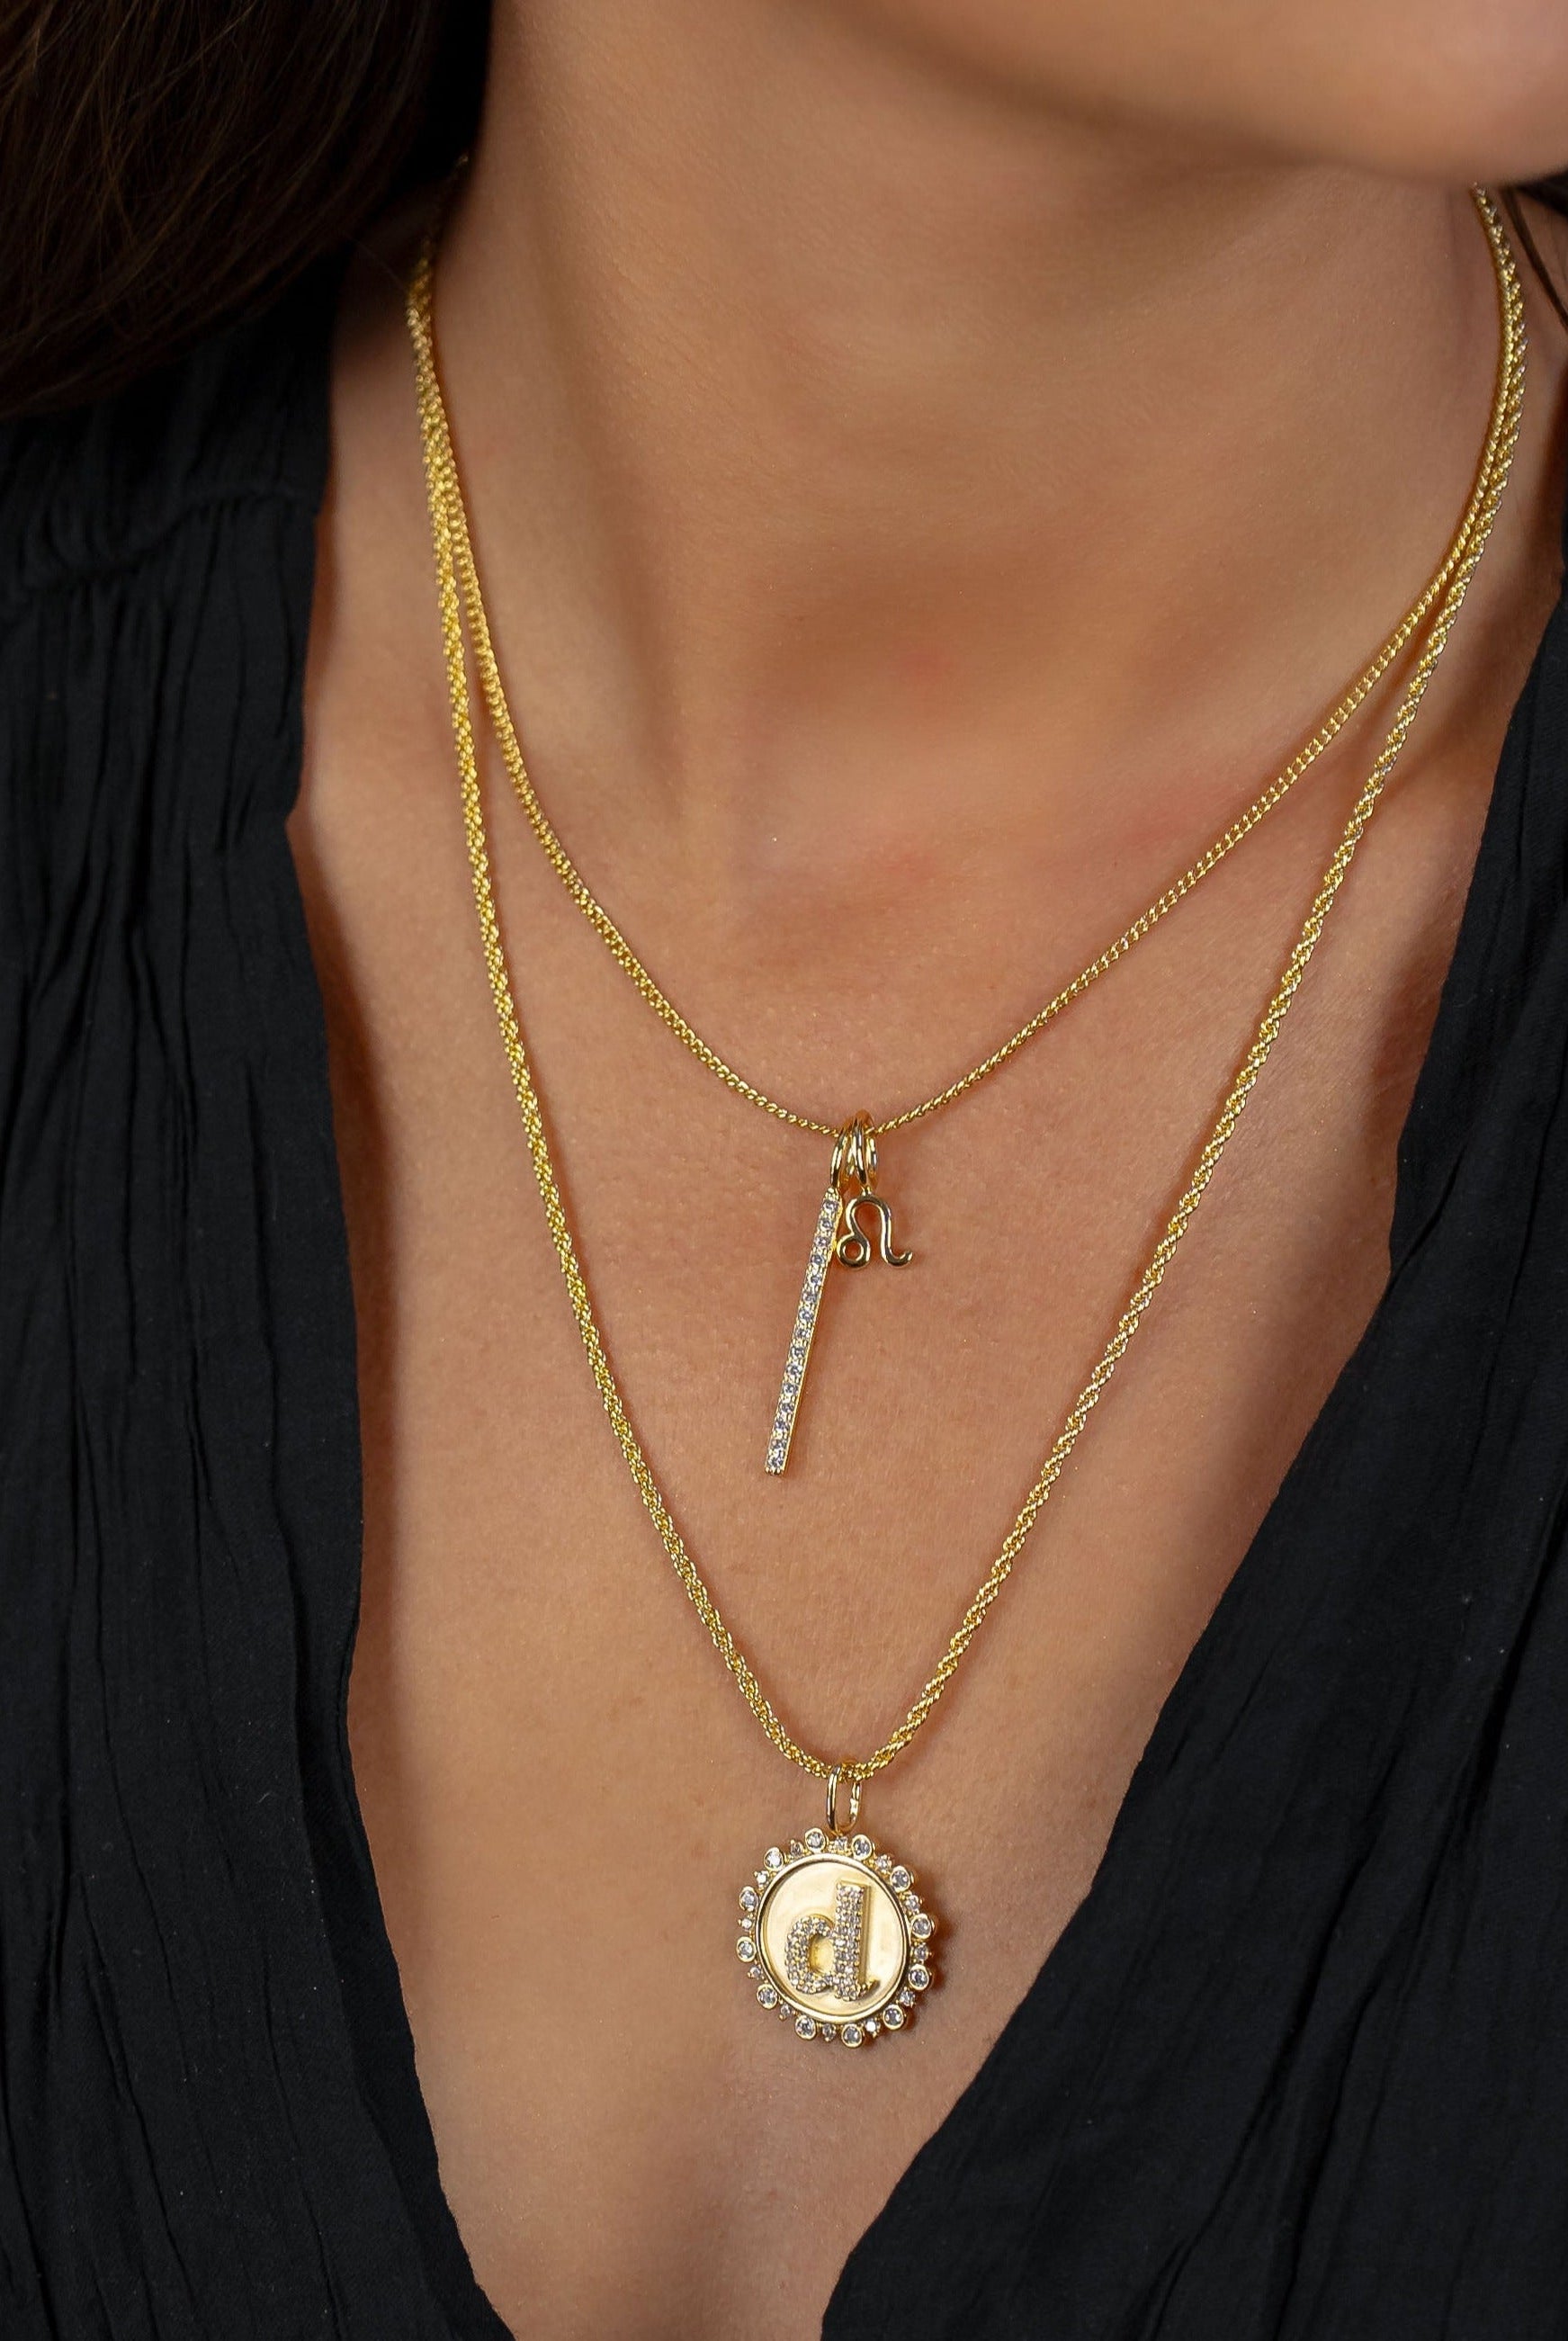 Skinny Rope Chain Necklace-Necklaces-The Sis Kiss®-Urban Threadz Boutique, Women's Fashion Boutique in Saugatuck, MI